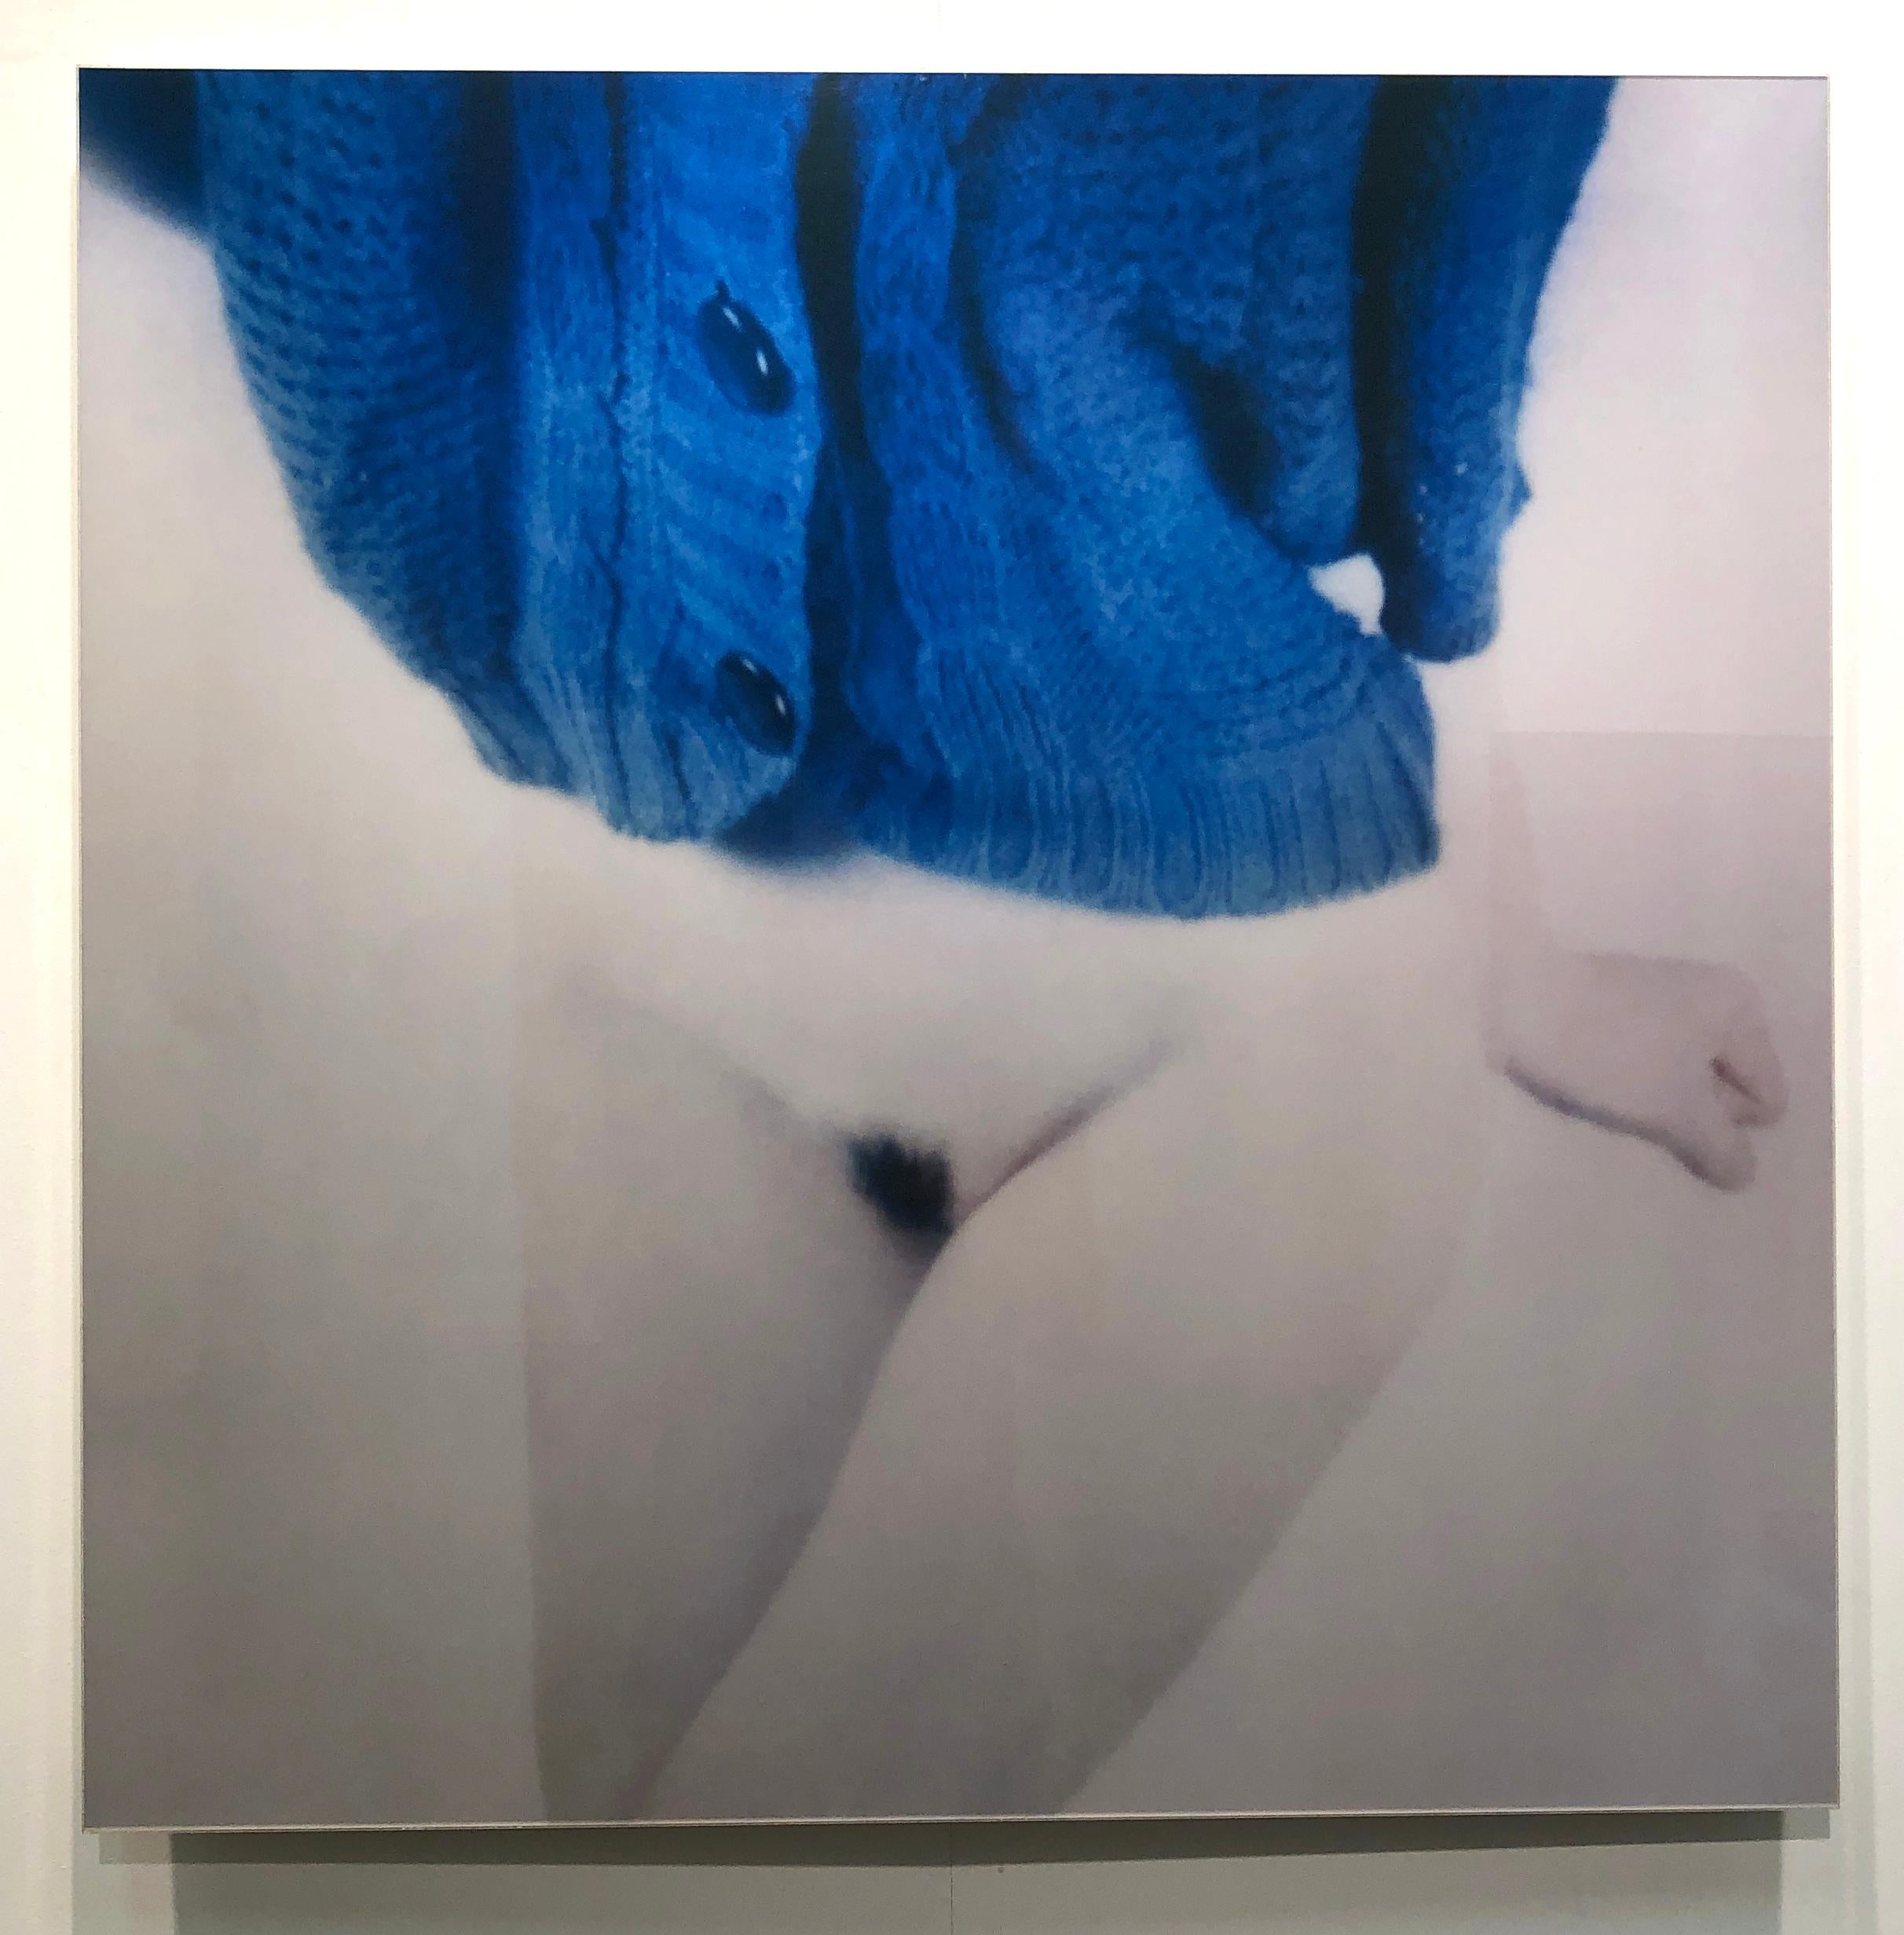 Semi Nude and Blue Knit, from the “Bright Bodies” photography series - Photograph by Mira Loew